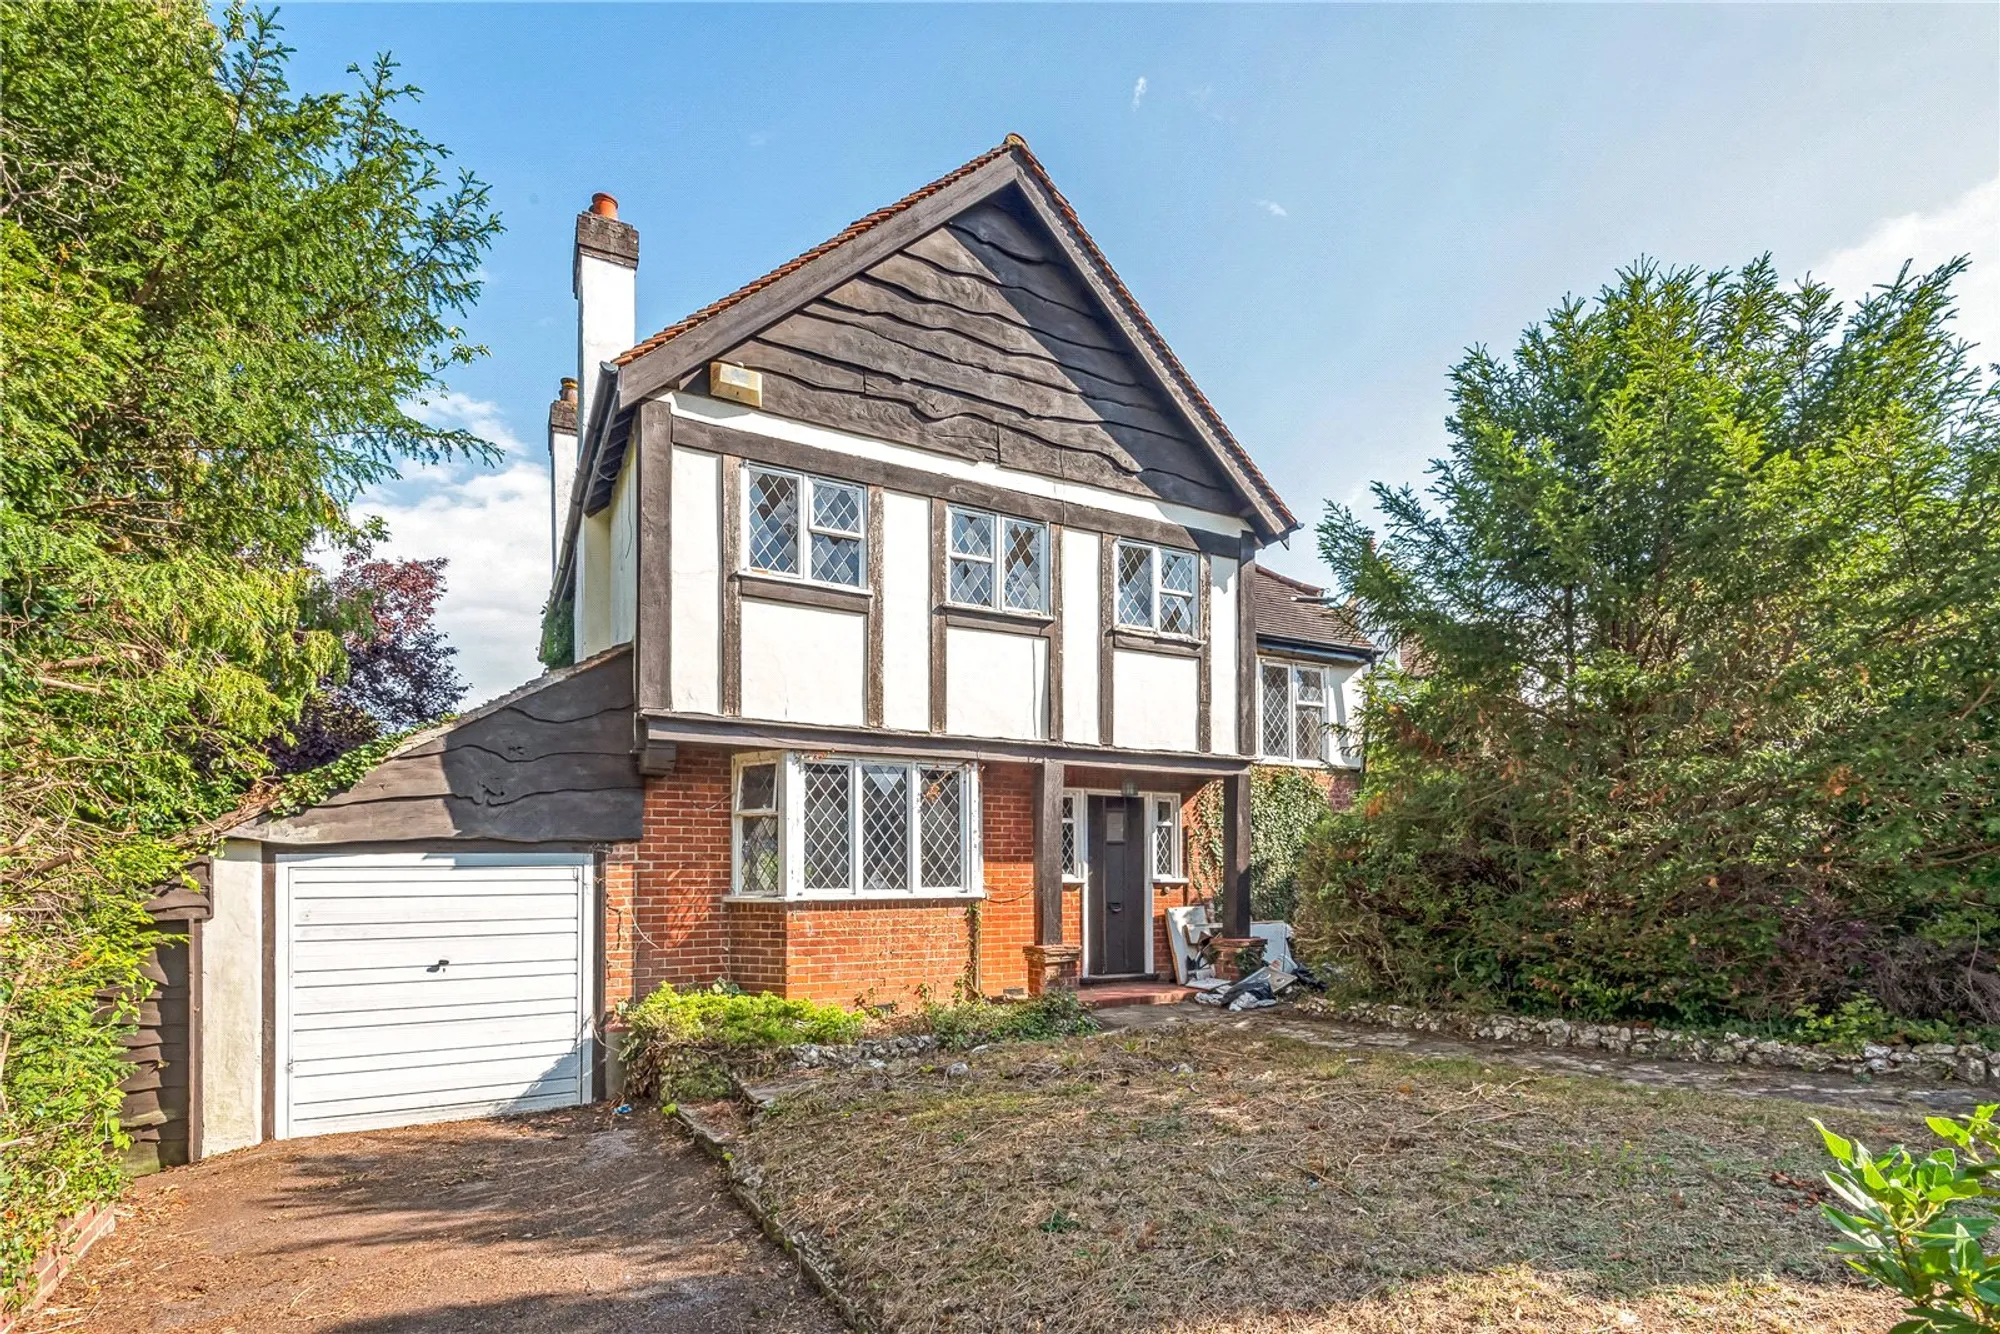 4 bed detached house for sale in Hartley Way, Purley - Property Image 1